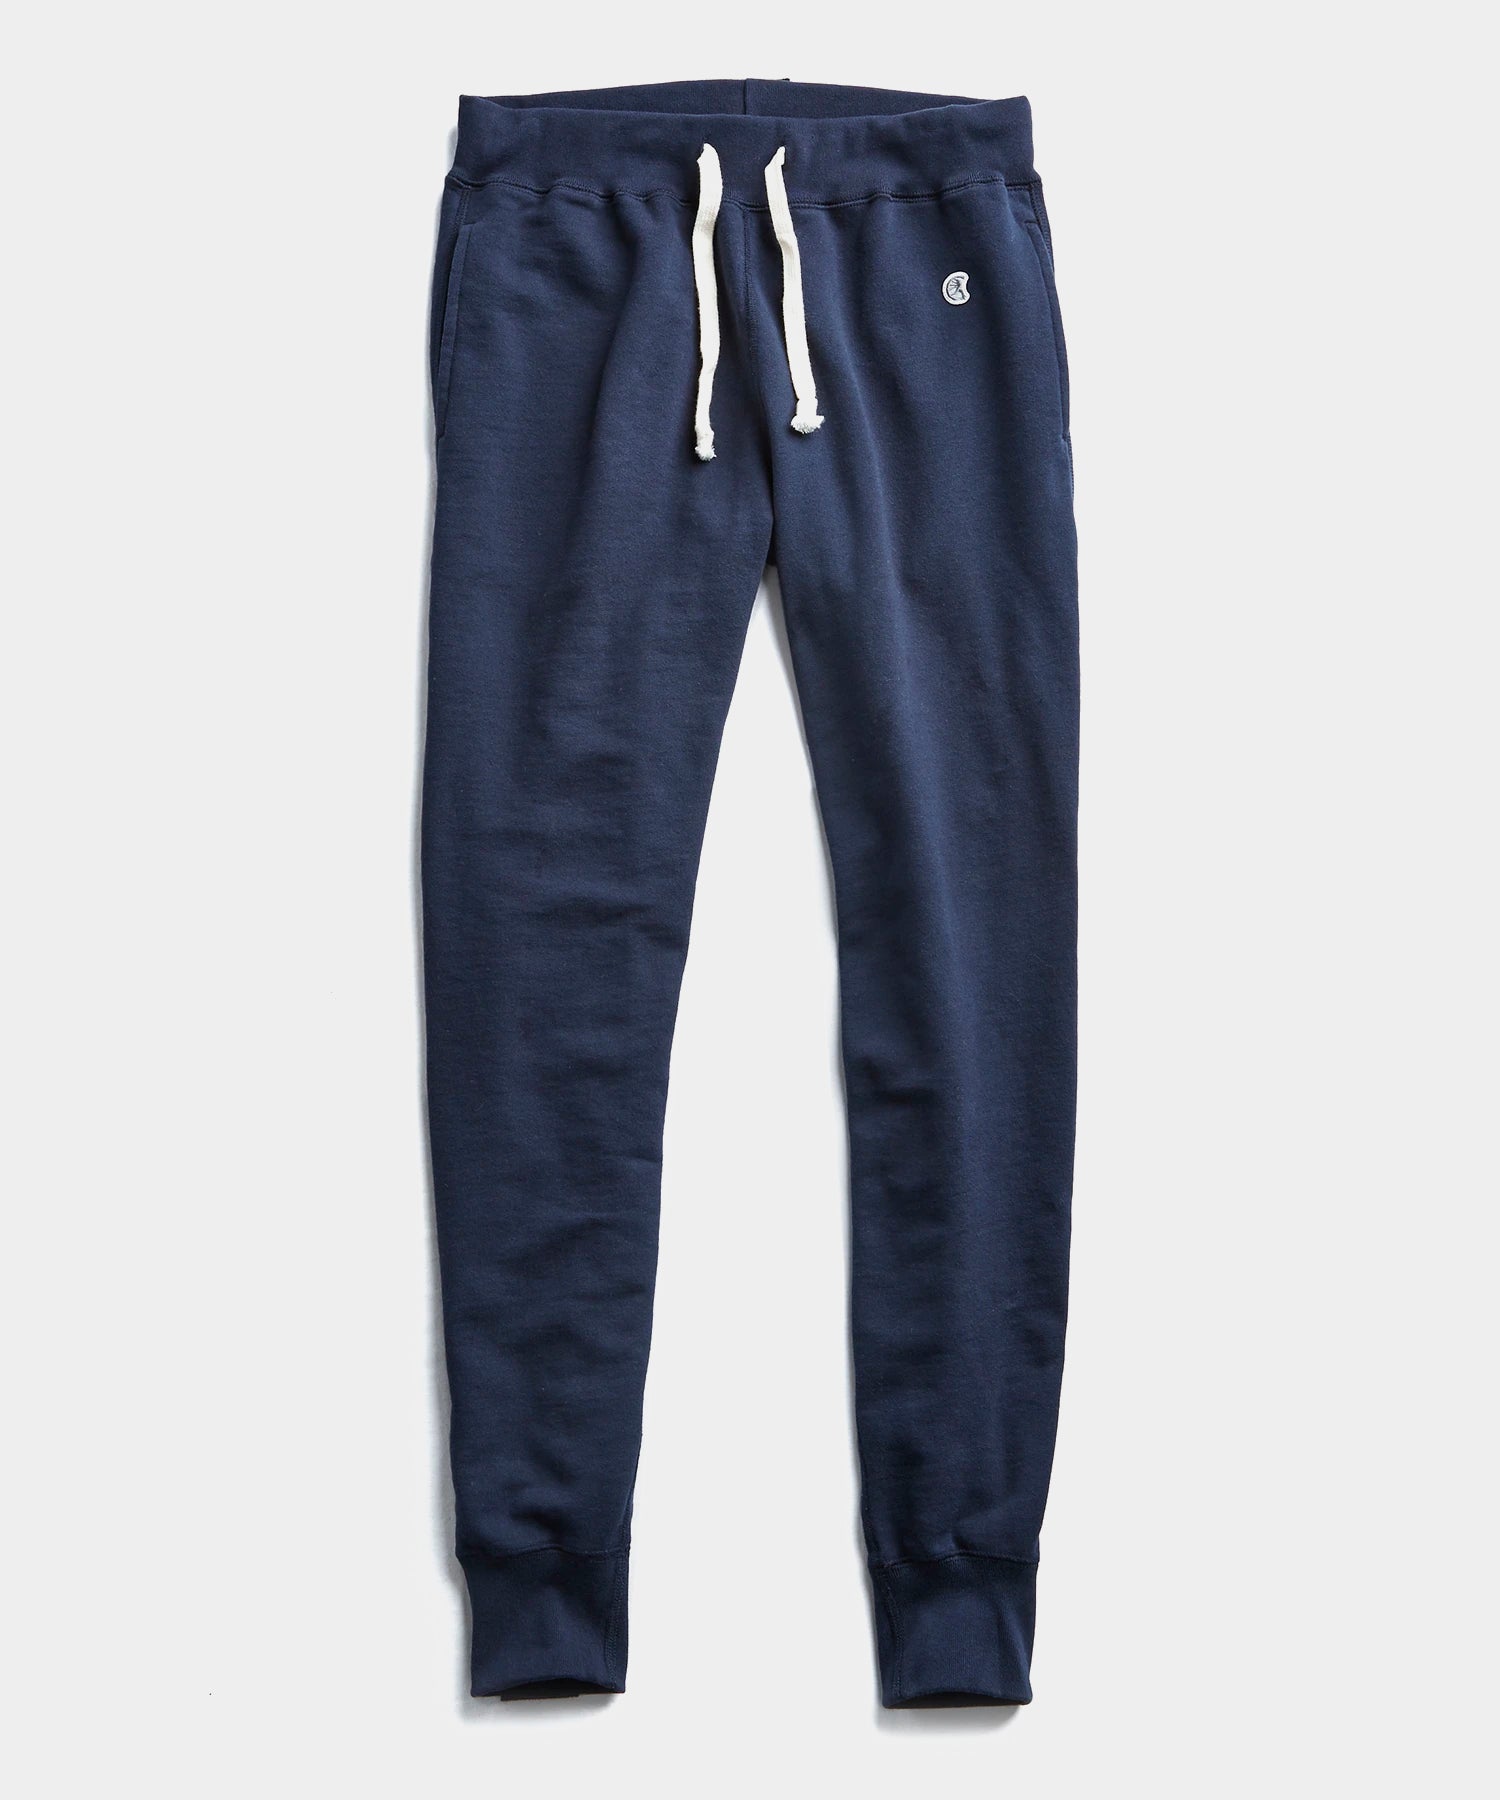 todd snyder champion joggers